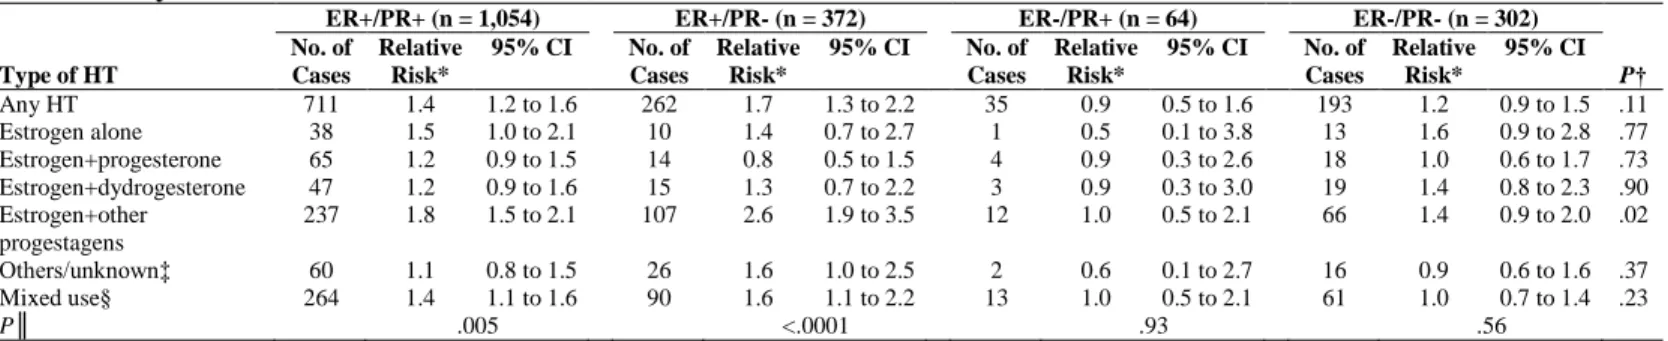 Table 5. Relative Risks of Receptor-Defined Breast Cancers for HT Ever-Use Compared With HT Never-Use: E3N  Study 1990-2002 